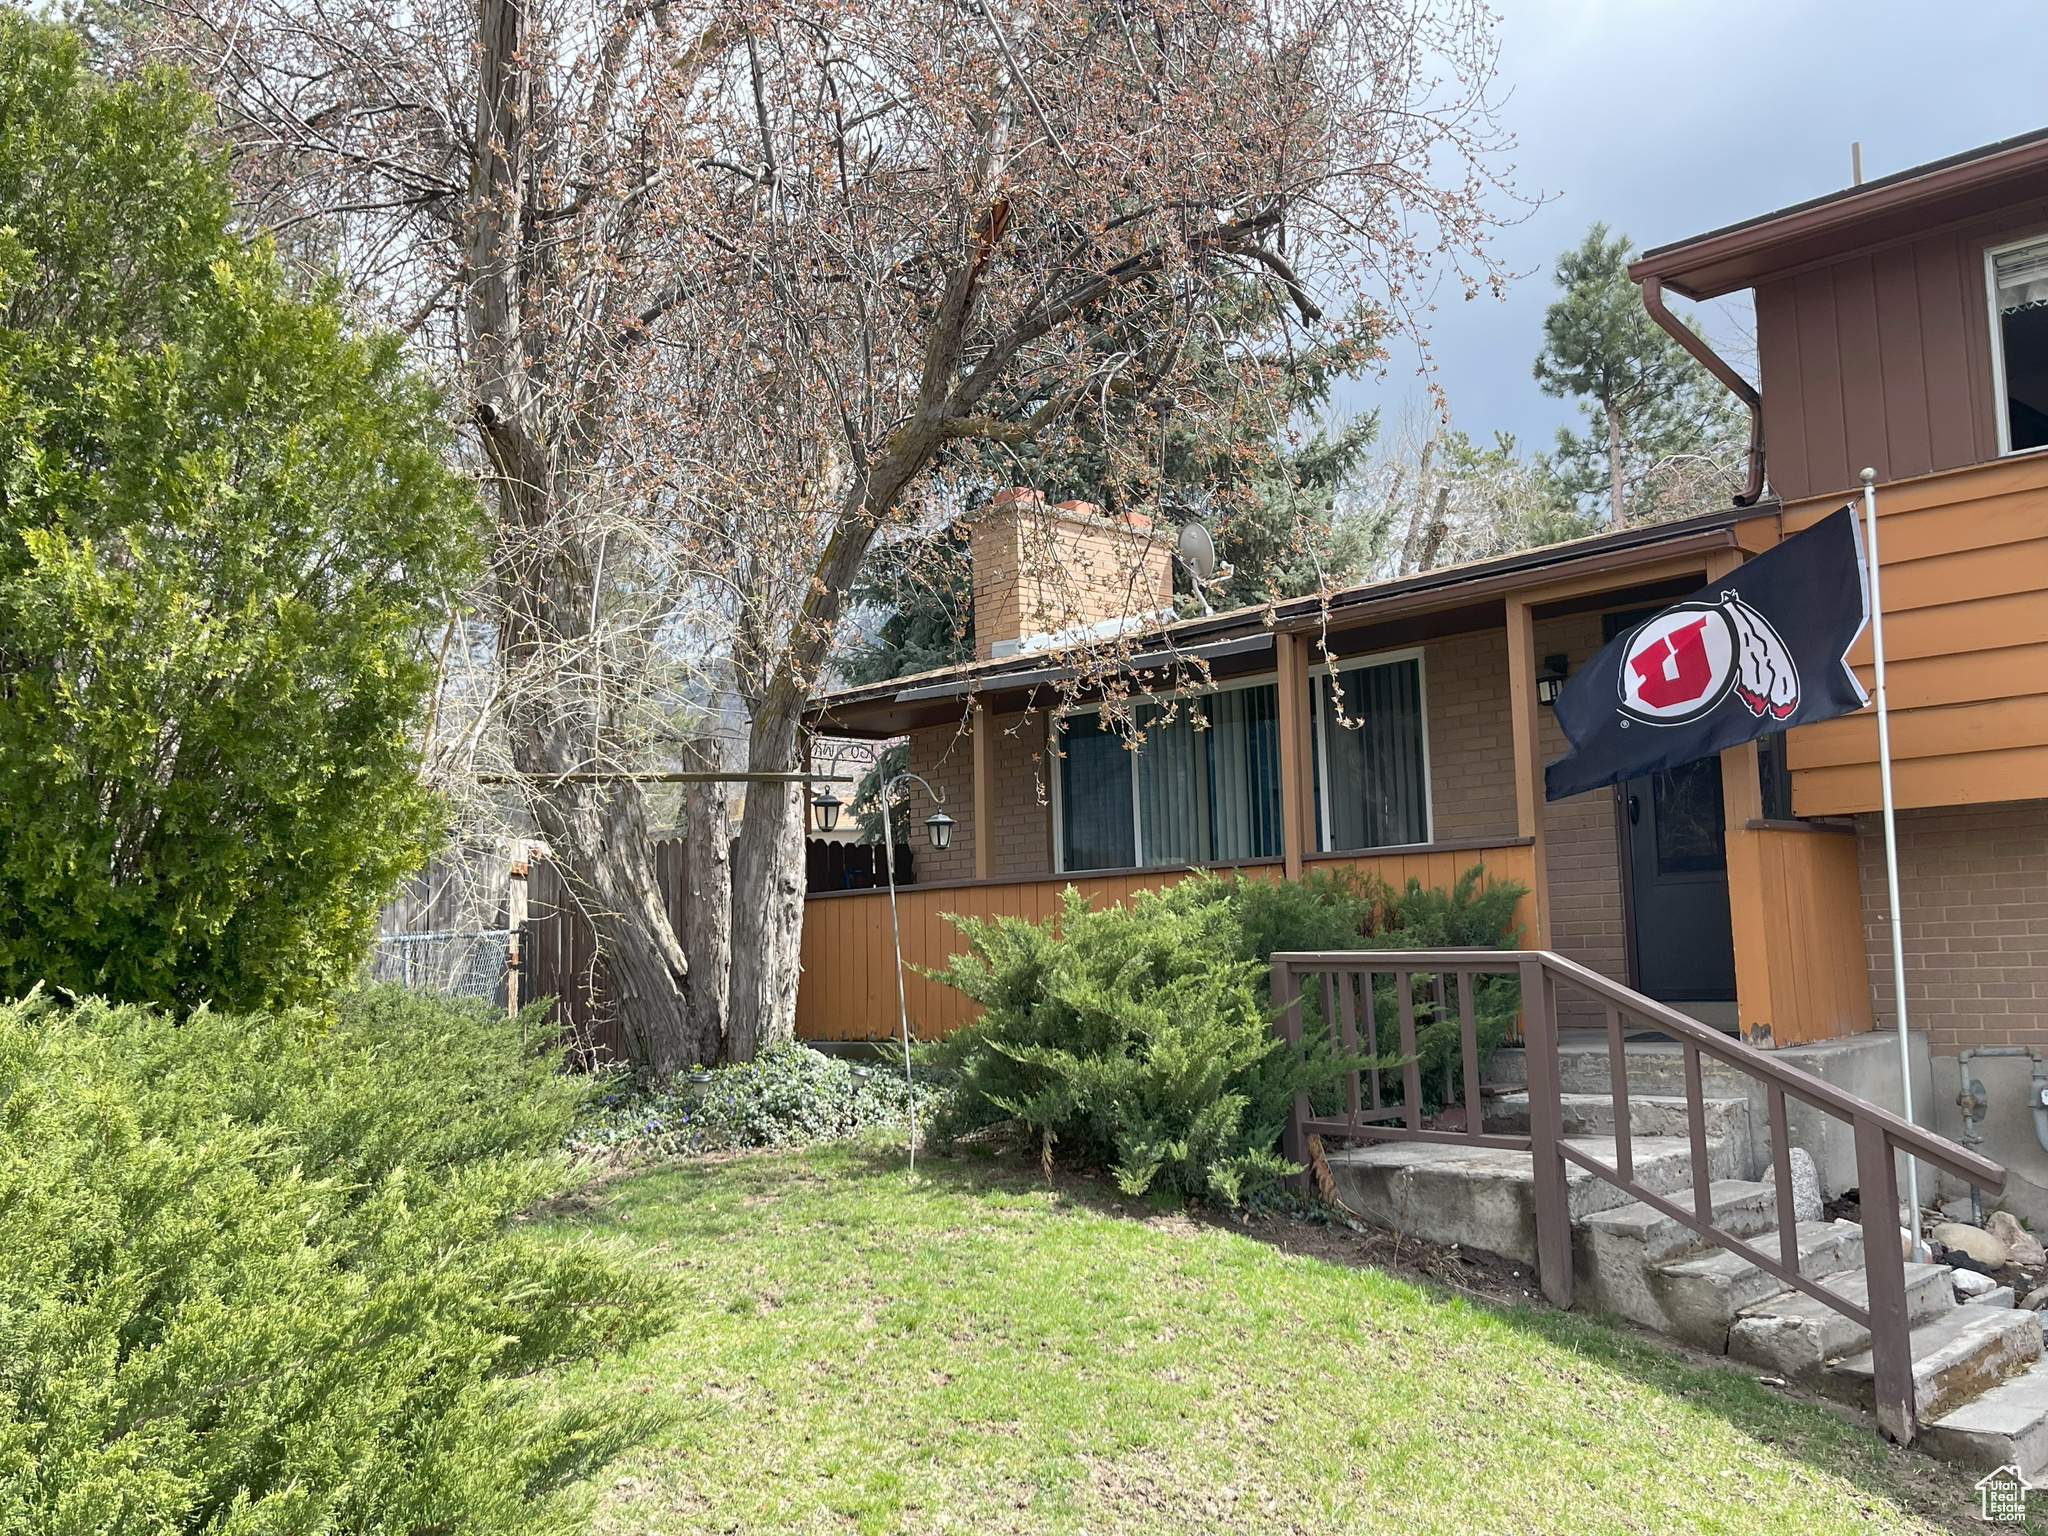 2438 E OKESON, Holladay, Utah 84117, 4 Bedrooms Bedrooms, 11 Rooms Rooms,1 BathroomBathrooms,Residential,For sale,OKESON,1991430